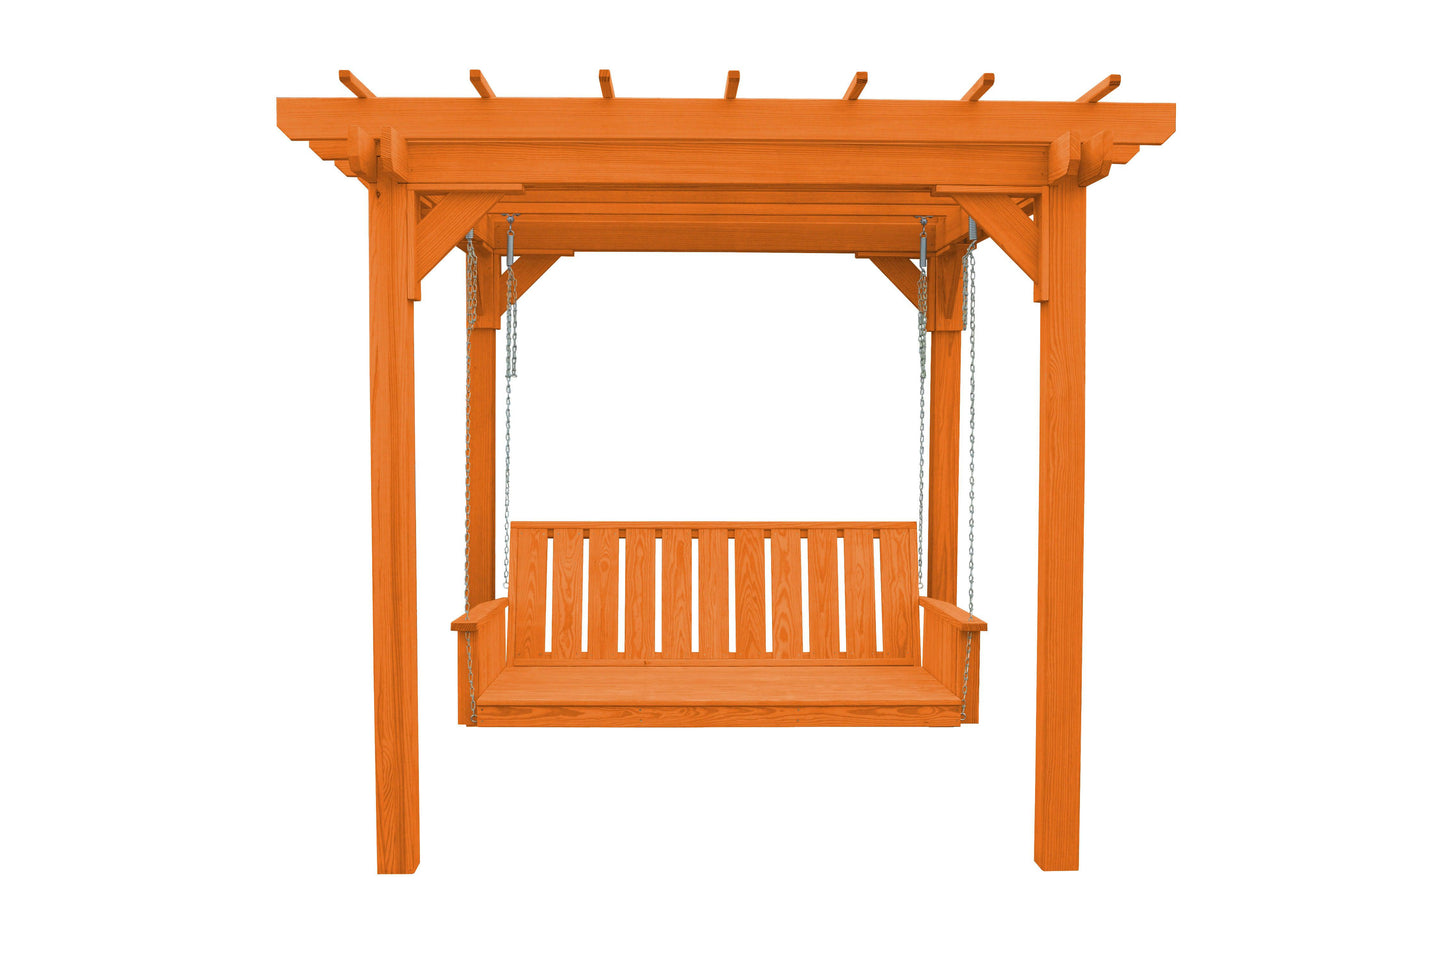 A&L Furniture Co. Pressure Treated Pine 8' x 8' Bradford Pergola with Swing Hangers - LEAD TIME TO SHIP 10 BUSINESS DAYS